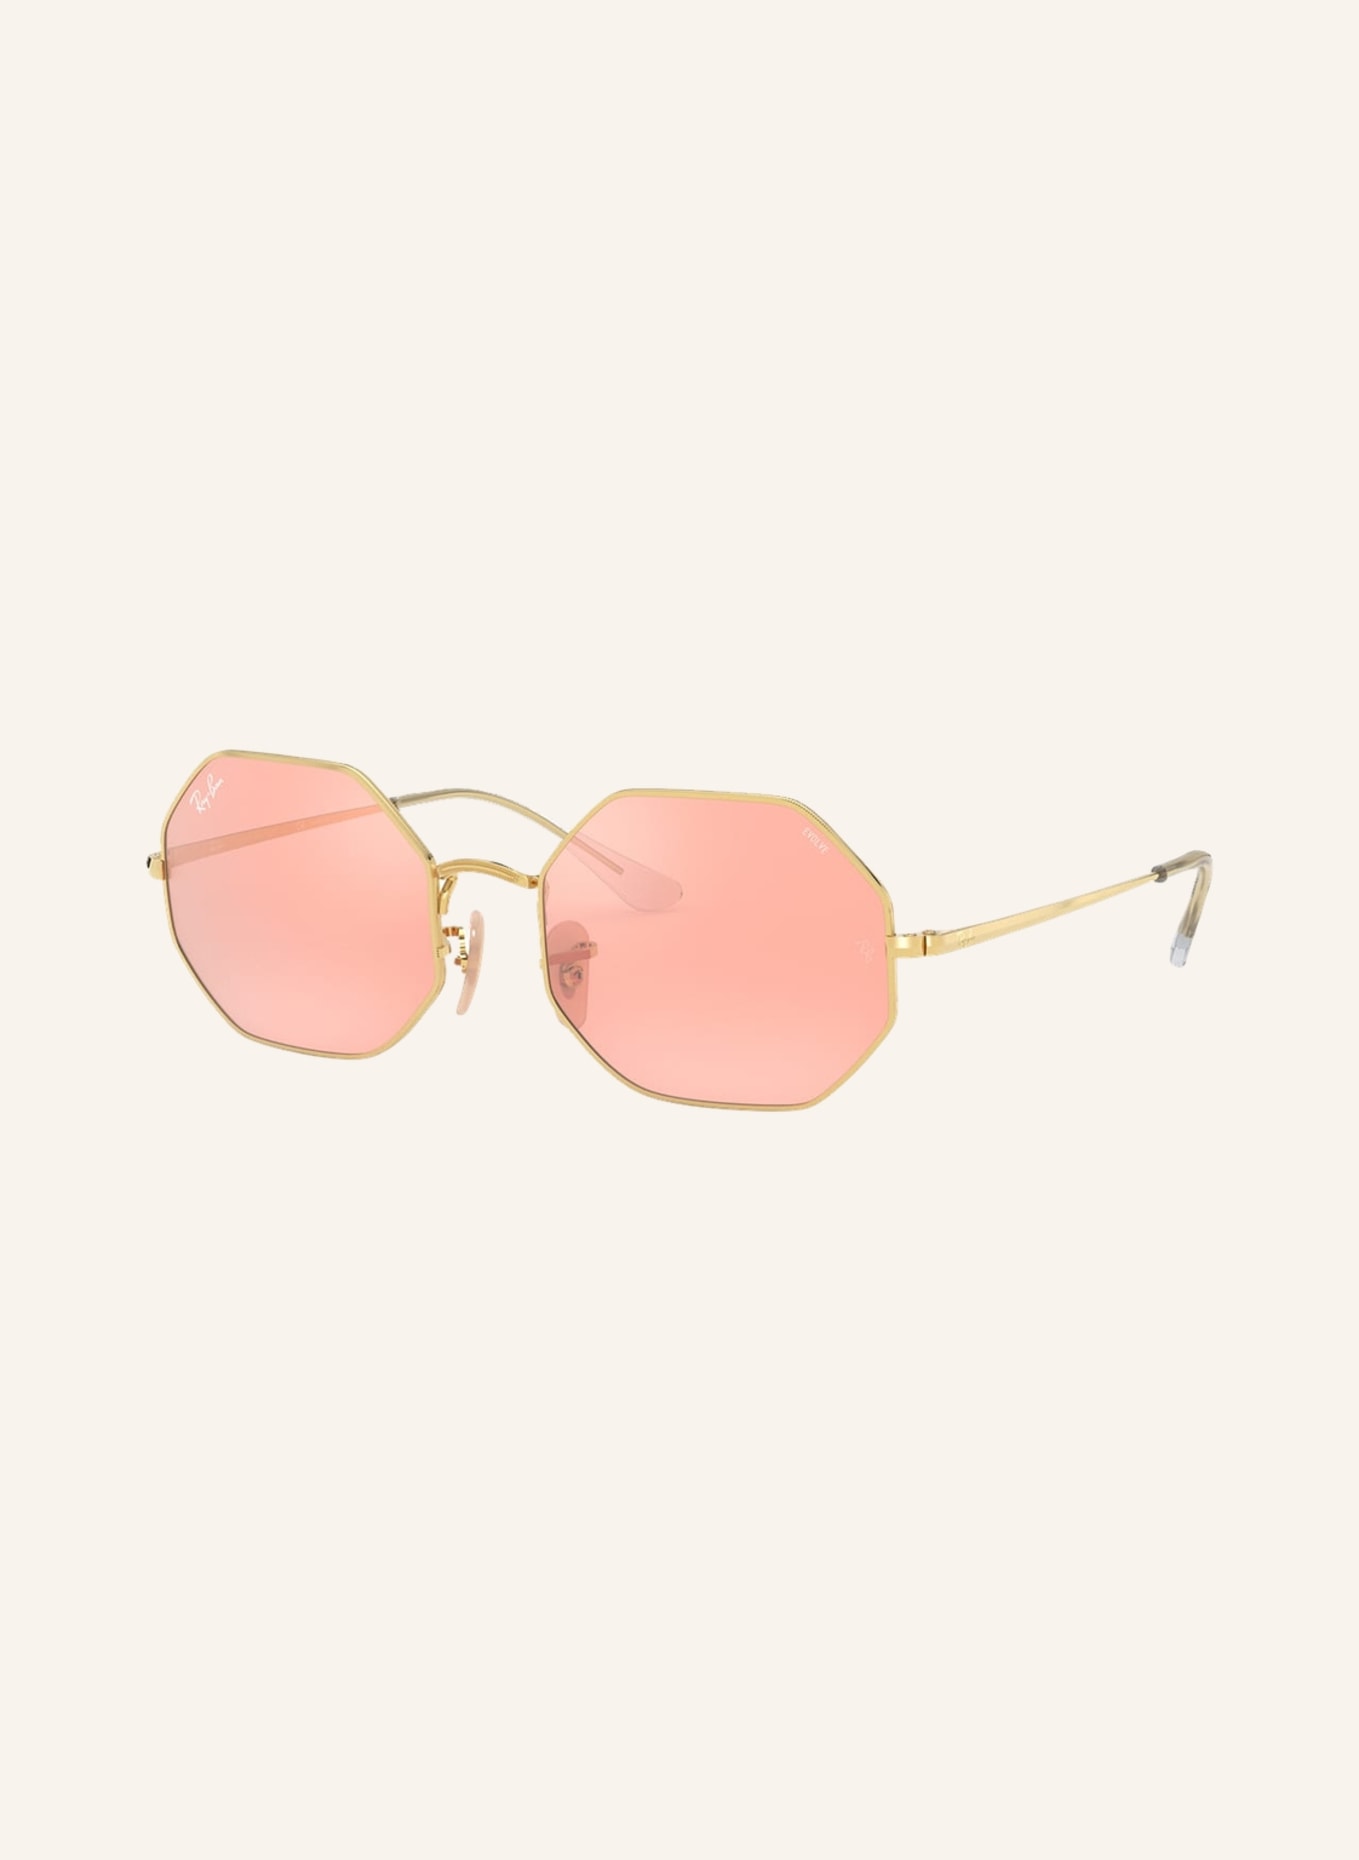 Ray-Ban Sunglasses RB1972, Color: 001/3E - GOLD/PINK (Image 1)